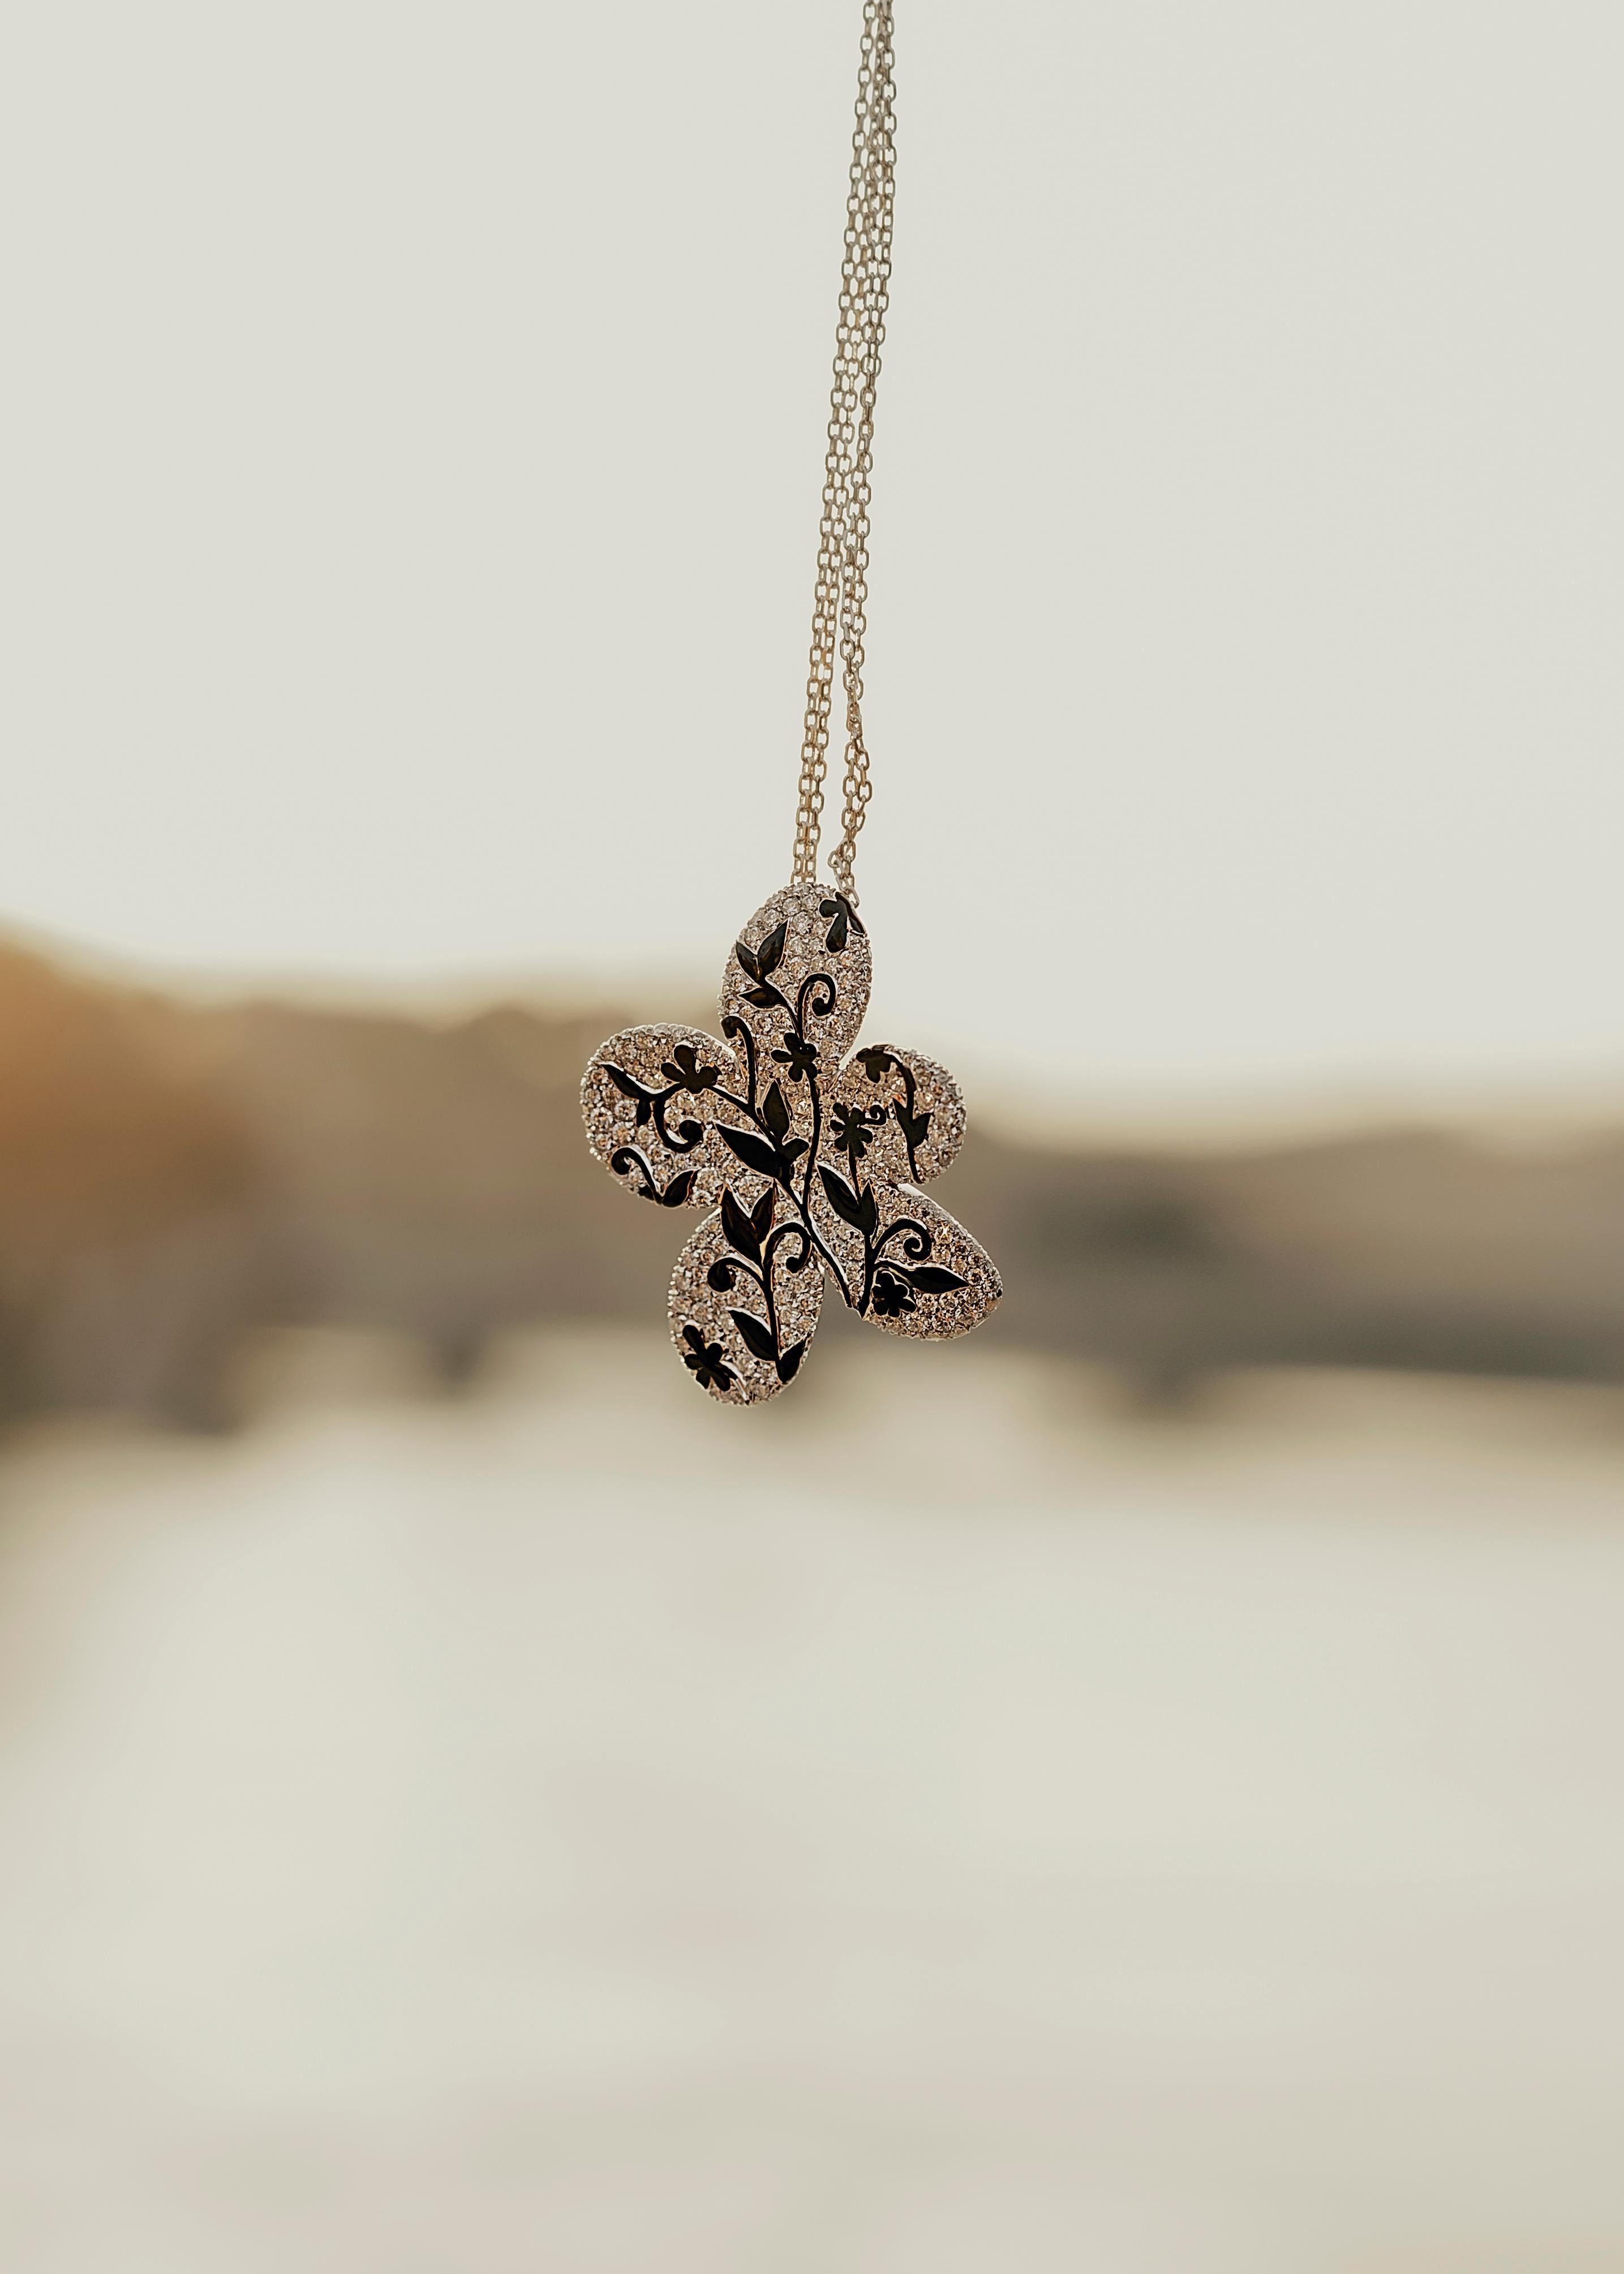 Loosely inspired by Van Gogh's flower paintings, this 18kt white gold necklace features a double chain and a flat, diamond-pavé flower pendant. A black flower painting adds a modern touch to the small piece of art.

The flowers paintings had a